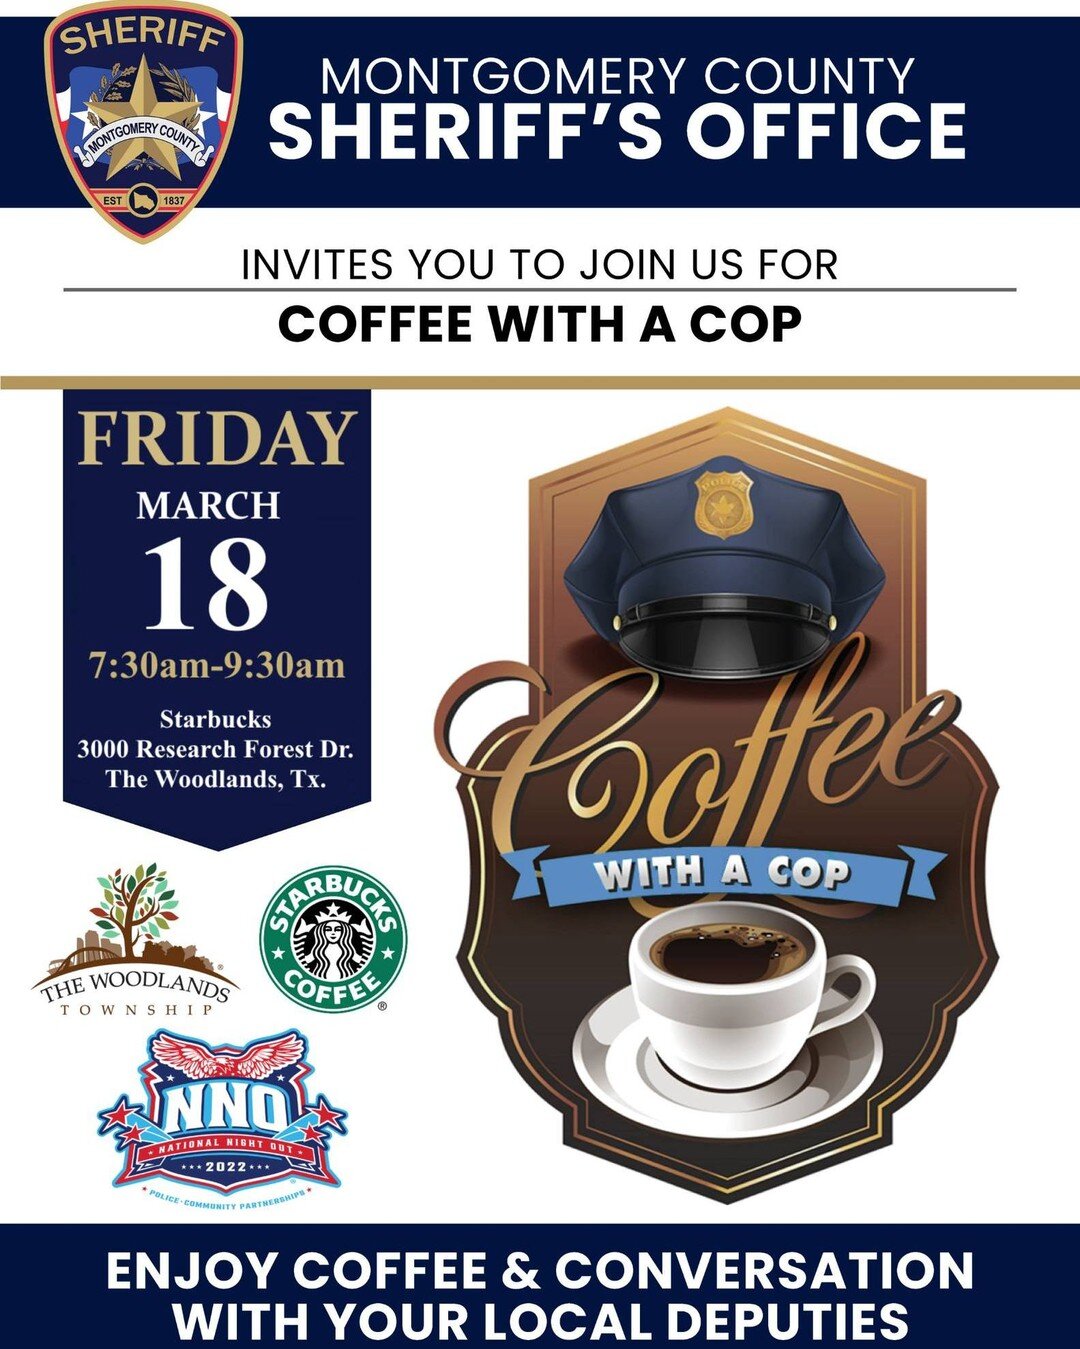 You are invited to join The Woodlands Township Neighborhood Watch and the Montgomery County Sheriff&rsquo;s Office for Coffee with a Cop on Friday, March 18 from 7:30 to 9:30 a.m. at Starbucks (3000 Research Forest Drive). This is a come and go event